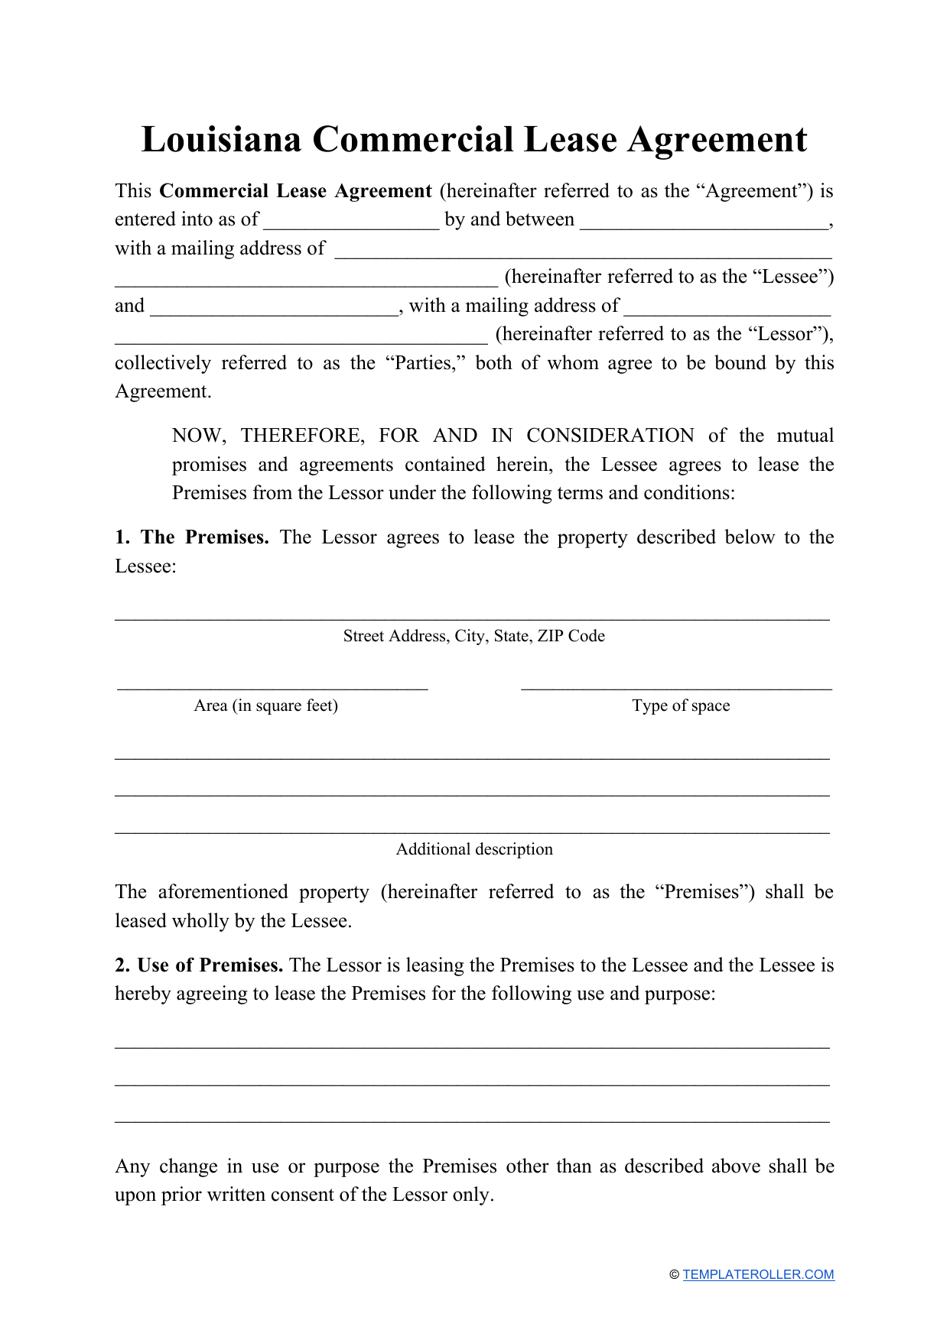 Commercial Lease Agreement Template - Louisiana, Page 1